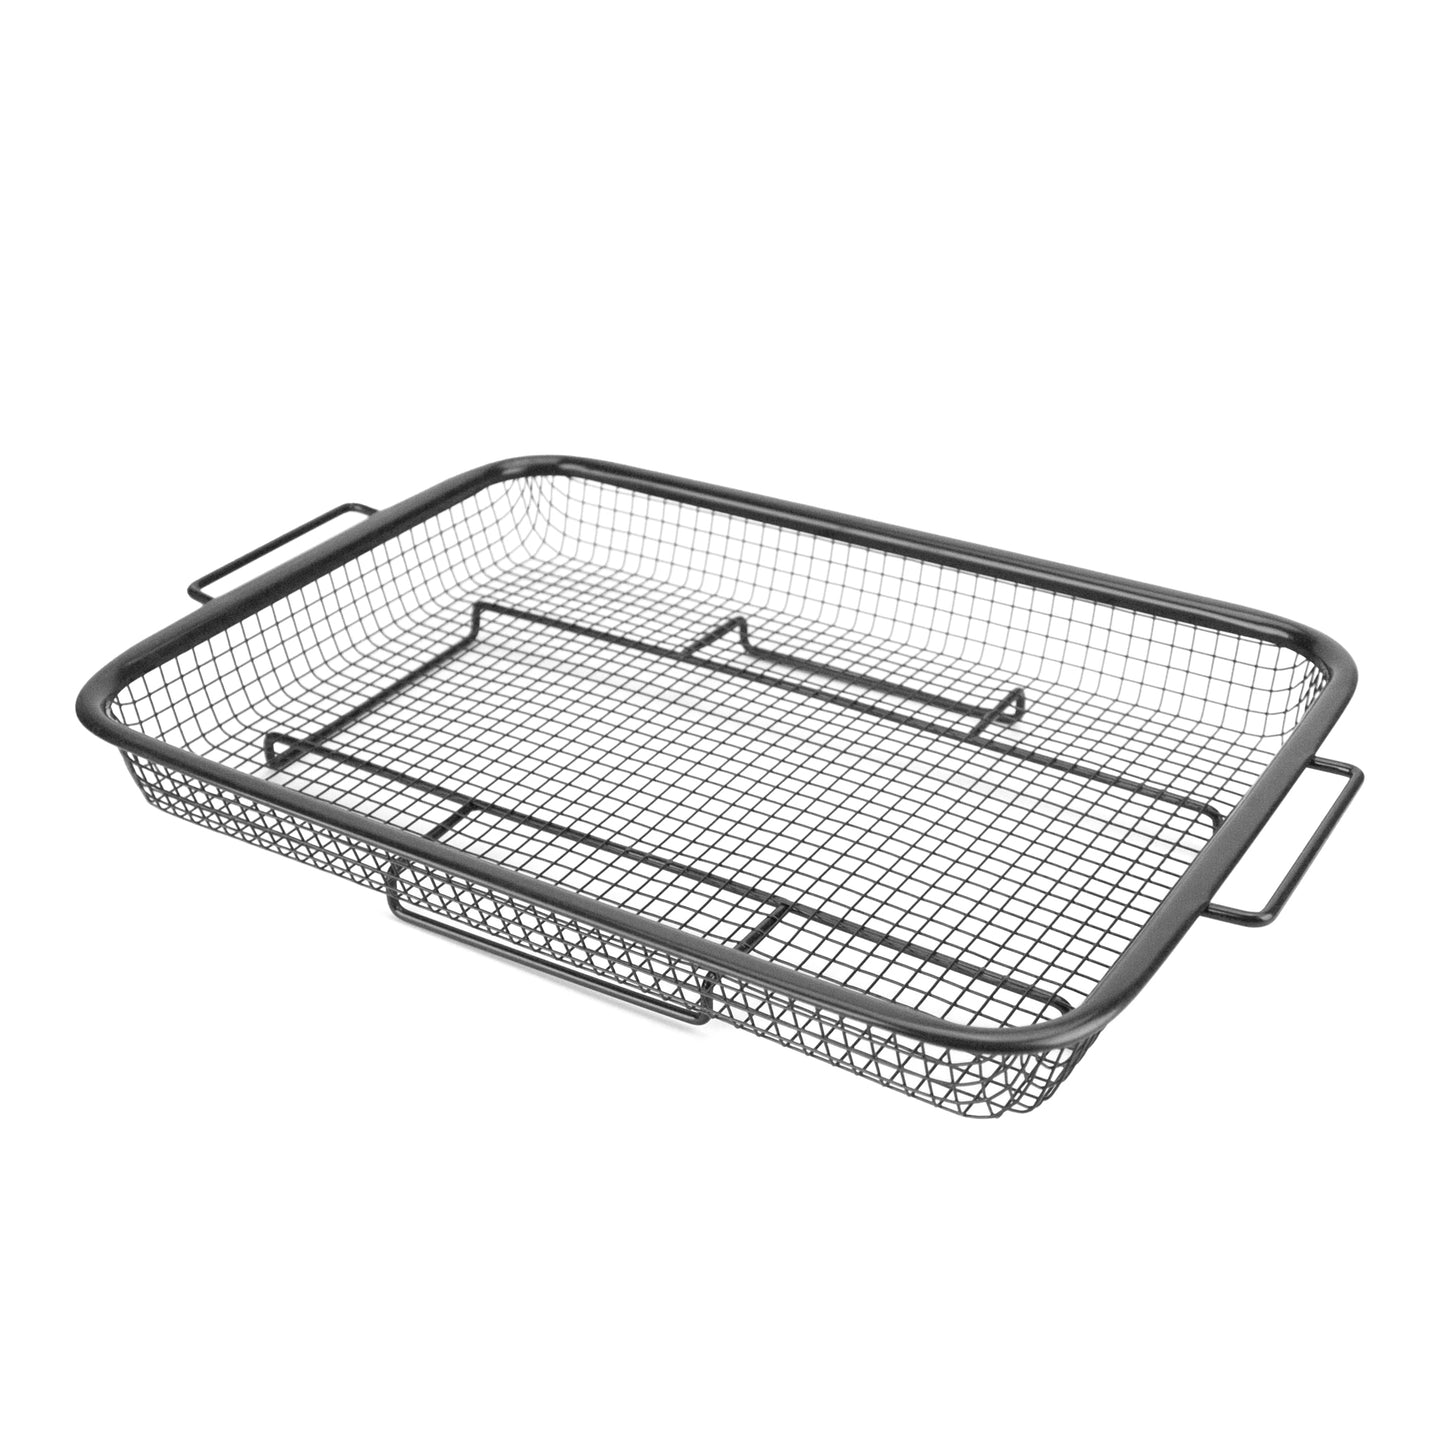 DiamoTech 2-Piece Crisping Baskets Oven & Air Fry Crisper Basket Nesting Set Toxin-Free Non-Stick  Healthy Cooking 9"x 13" Gray